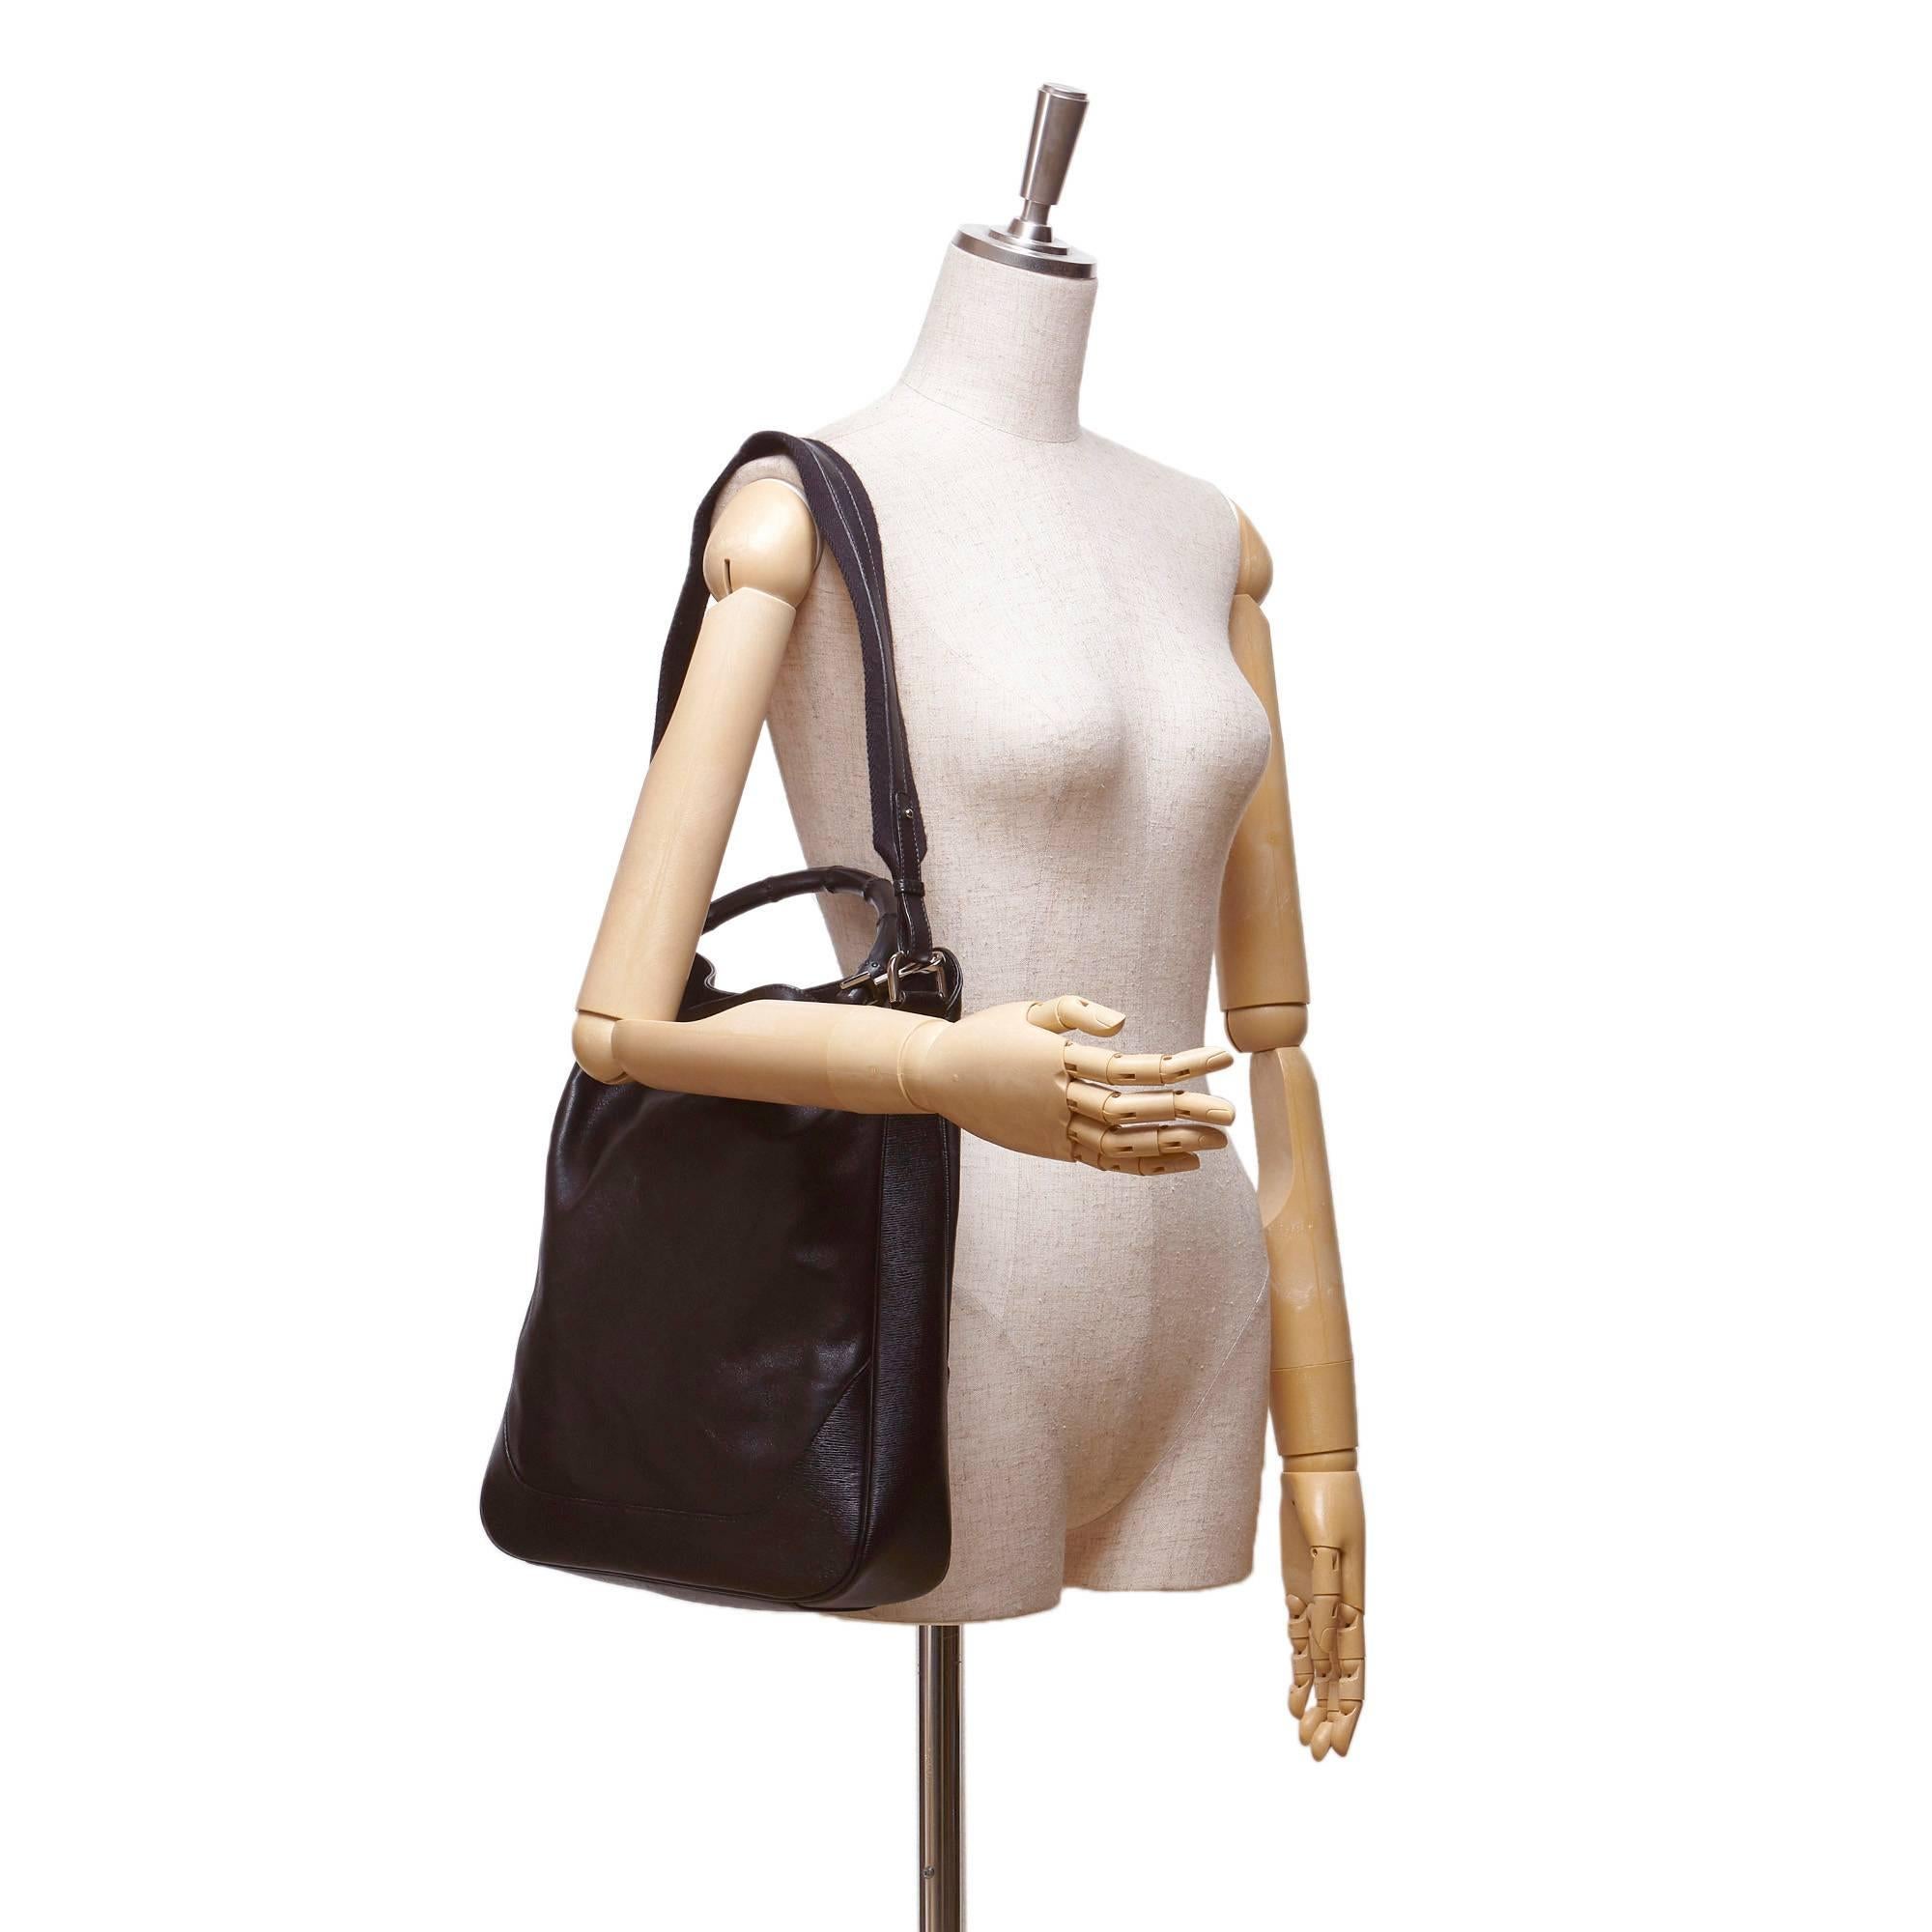 - This Gucci handbag features a black leather body, iconic black bamboo top handle, a detachable shoulder strap, open top with magnetic closure, and interior zip pocket. The Gucci bamboo handle is always in style!!!

- Made in Italy. 

- Size:  29cm